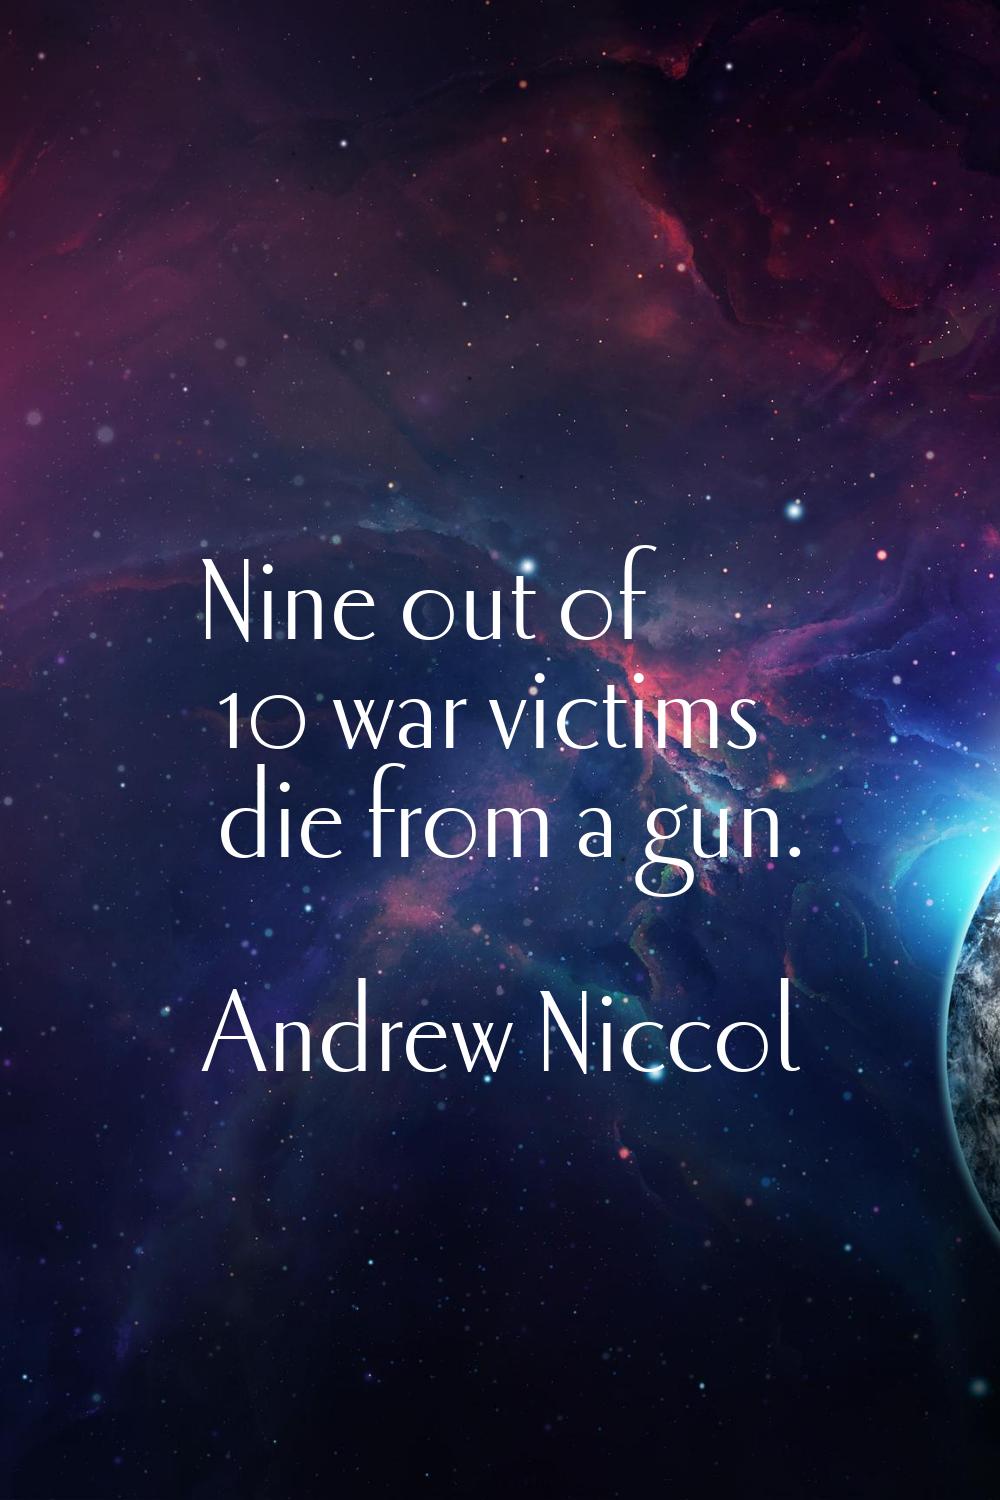 Nine out of 10 war victims die from a gun.